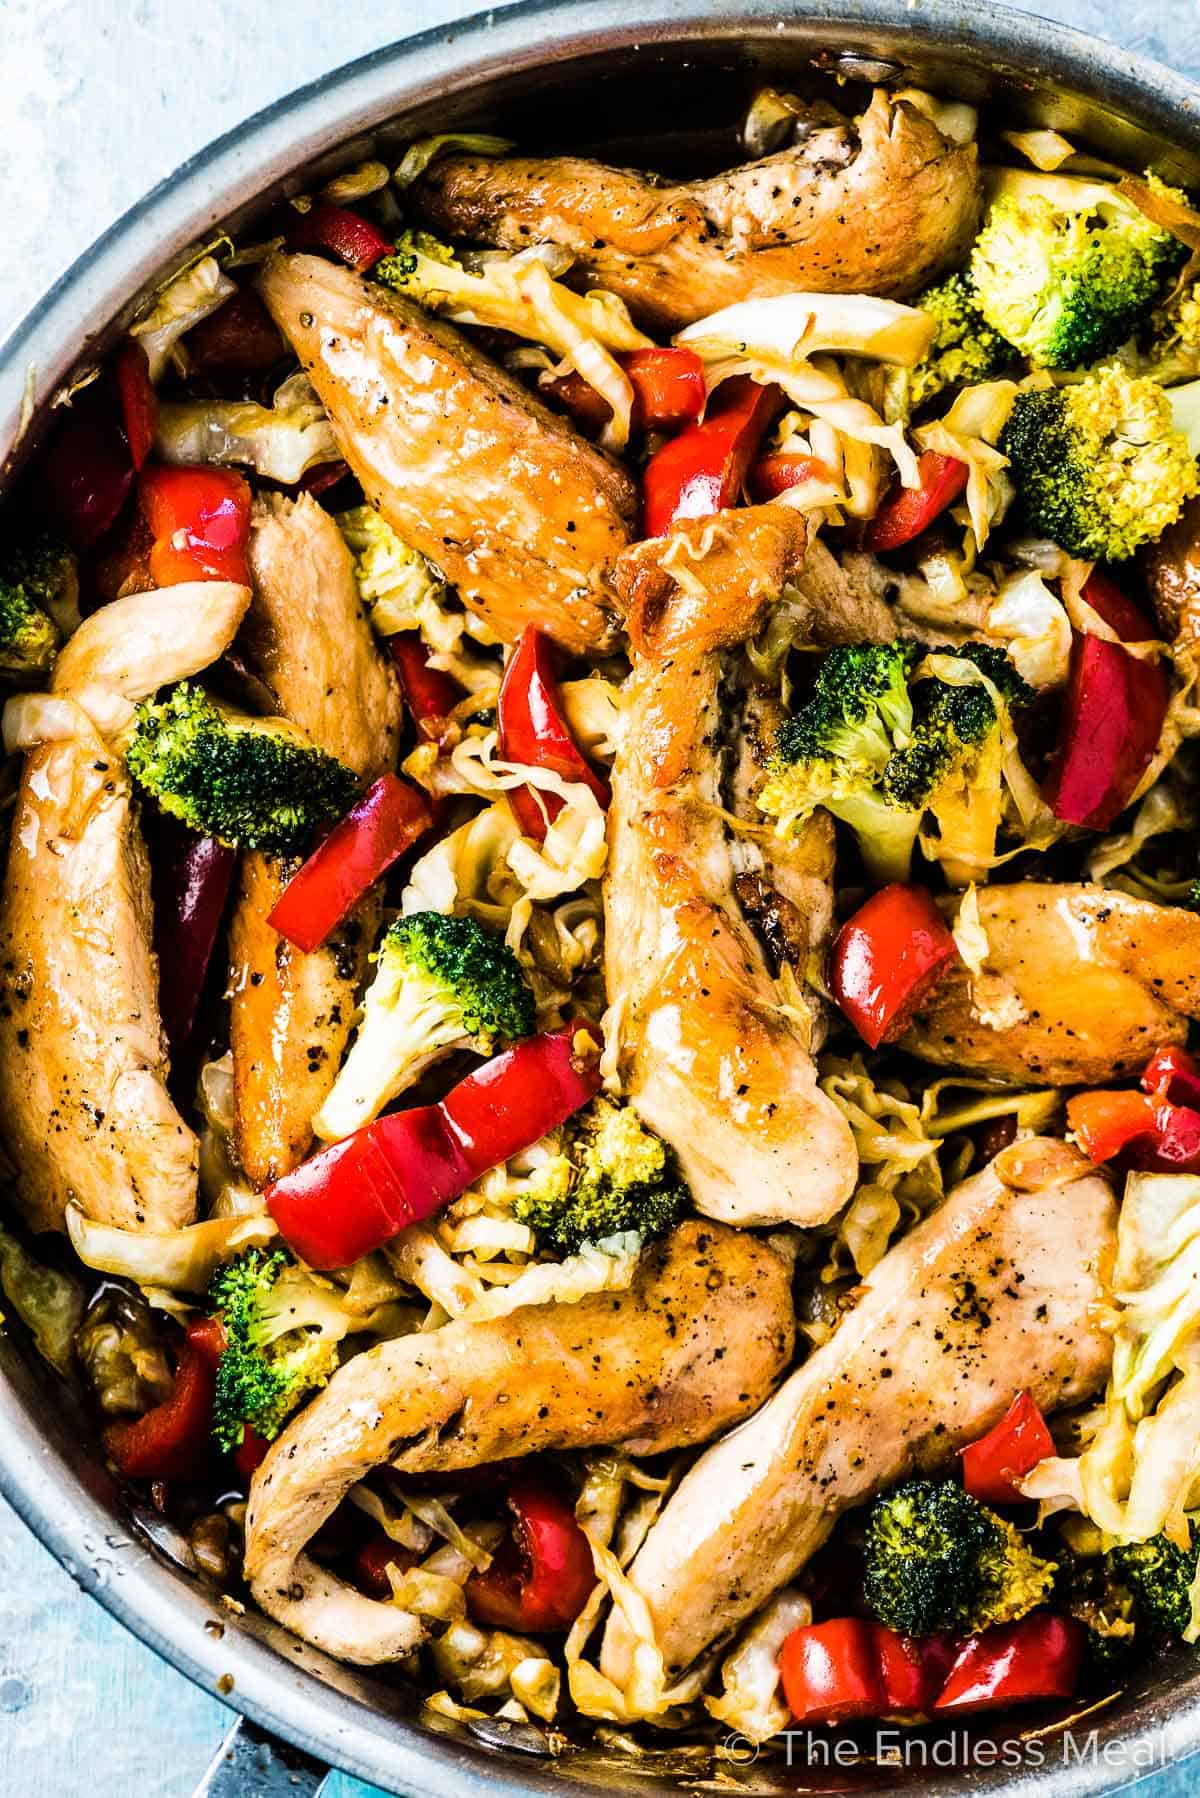 A frying pan full of chicken cabbage stir fry with red peppers and broccoli for one of our healthy recipes for dinnertime